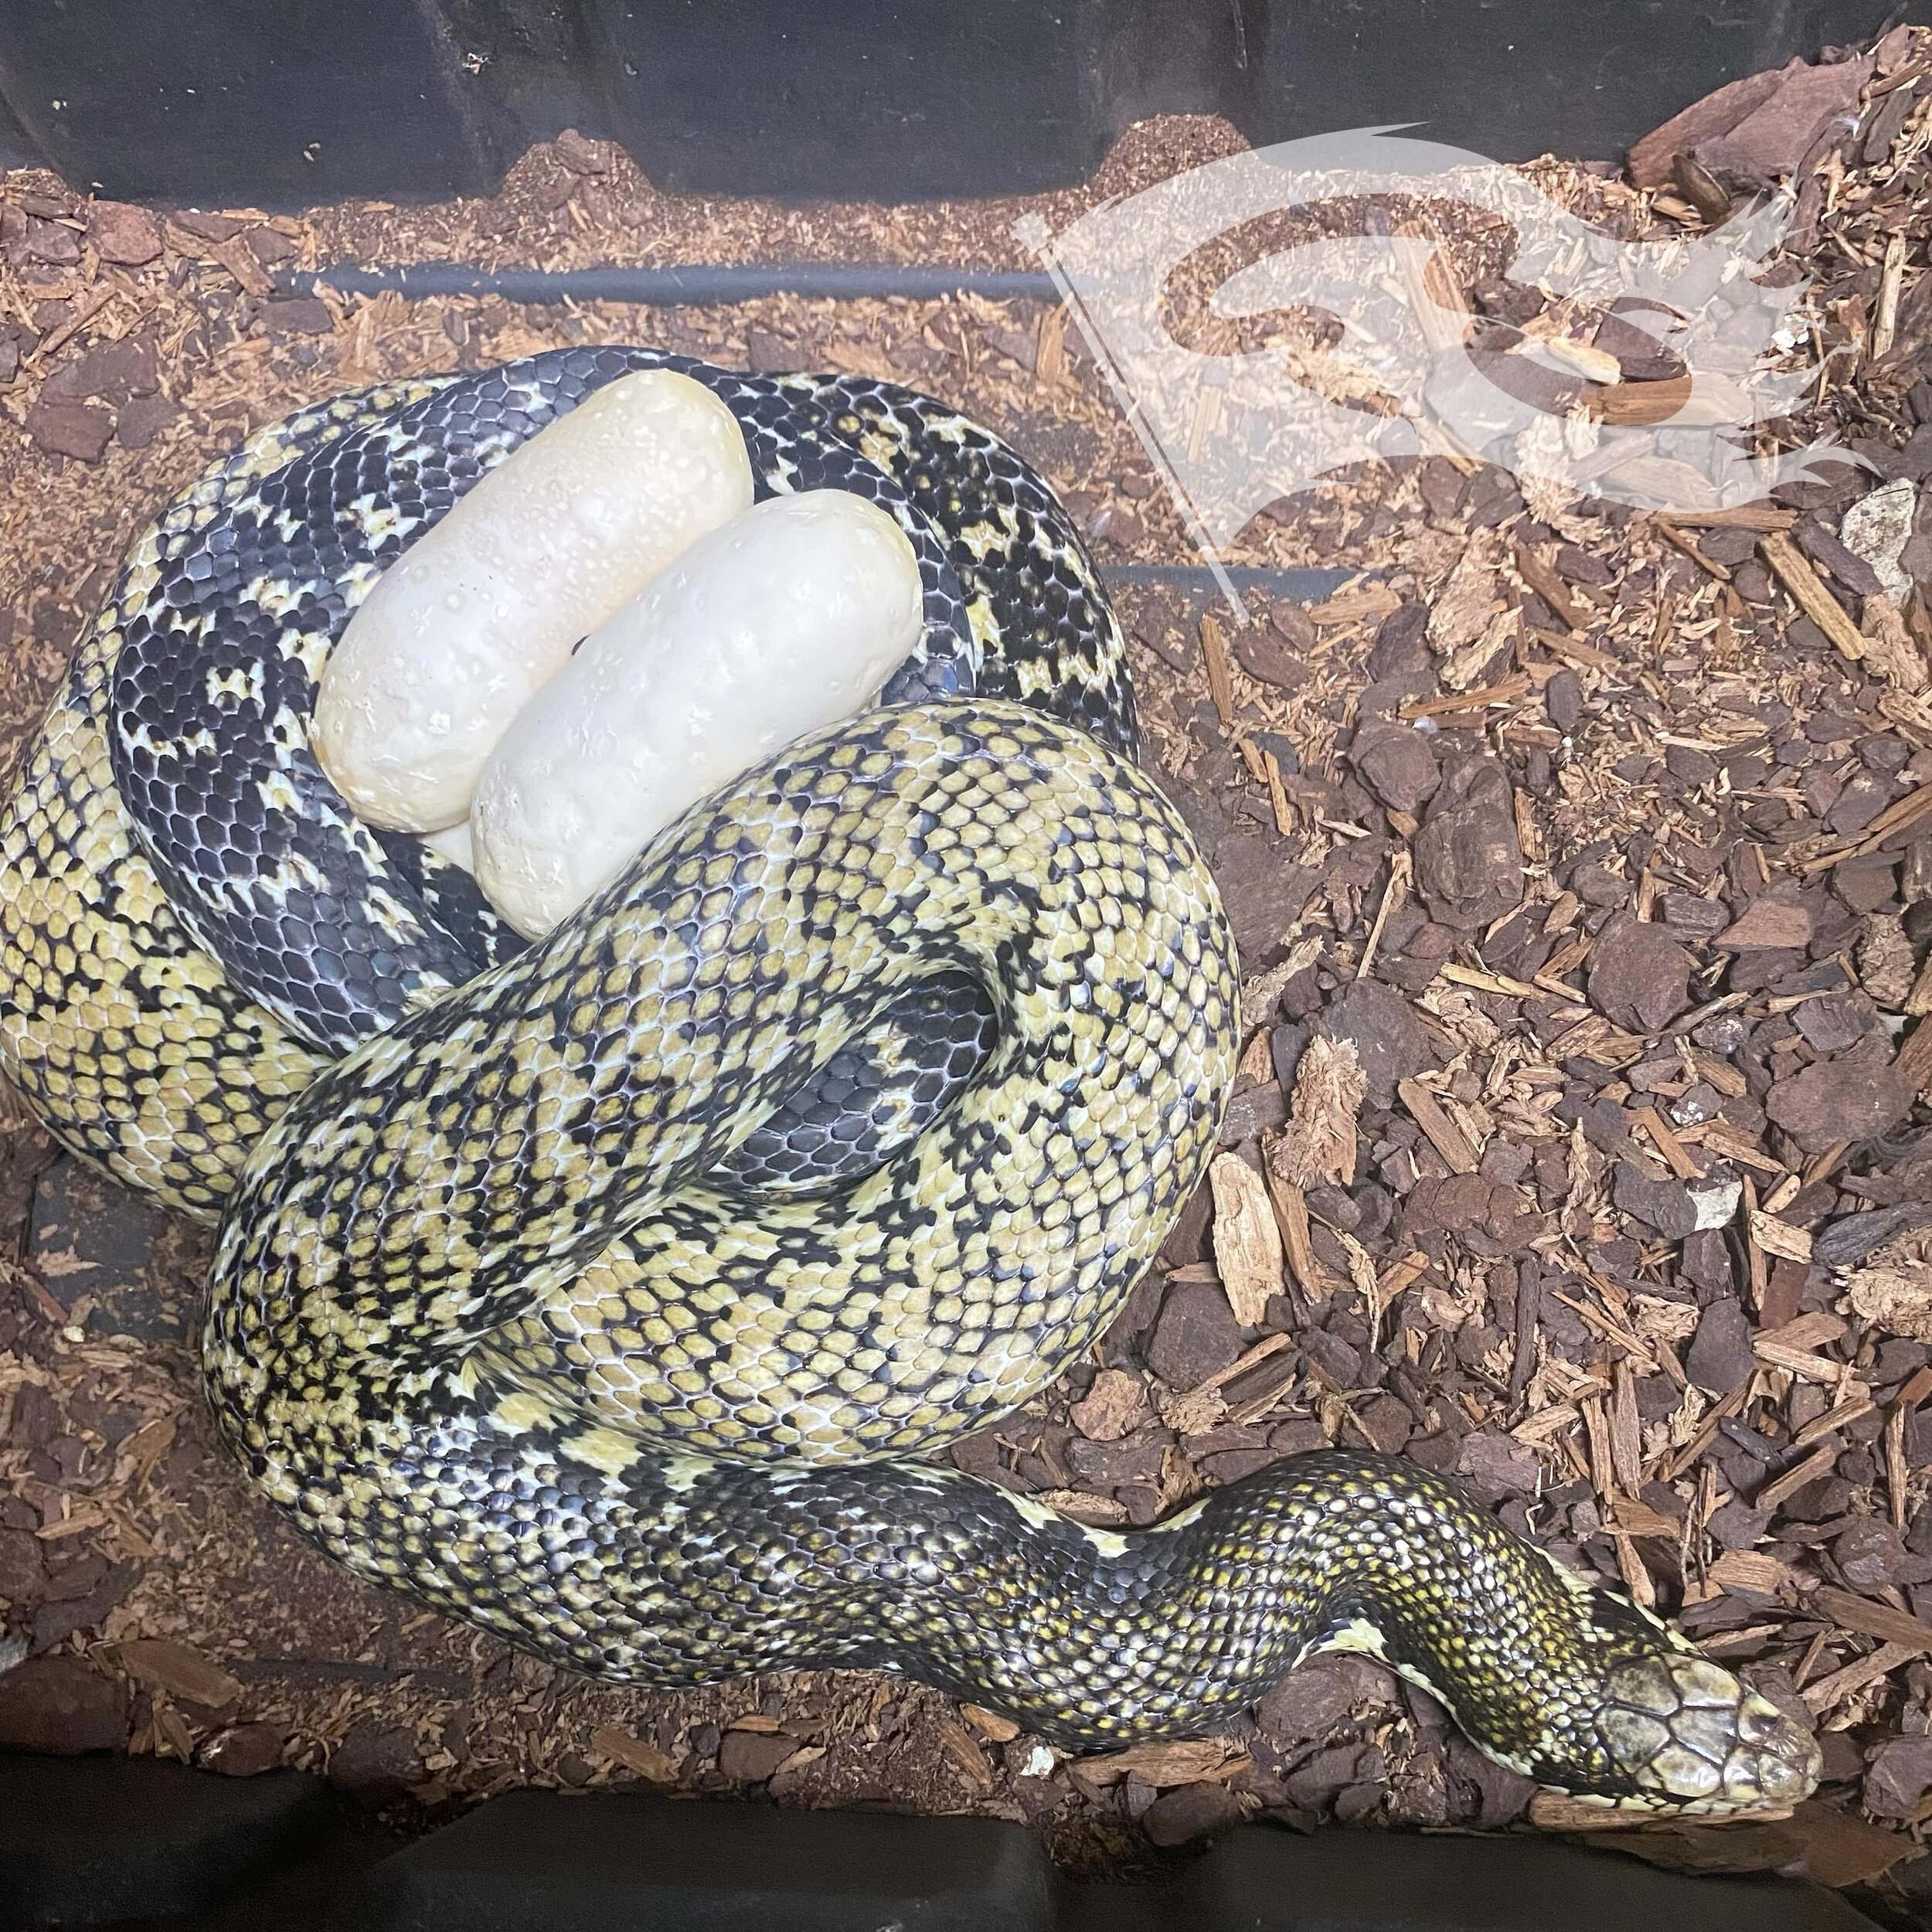 Clutch number 2 of 2024 of the found more Madagascar giant hognose! This girl was produced by Riley @rileys_reptiles this is her 2nd clutch to my CH male. 

#moreliapythonradionetwork #moreliapythons #colubrid #colubrids #colubridsofinstagram #colubr